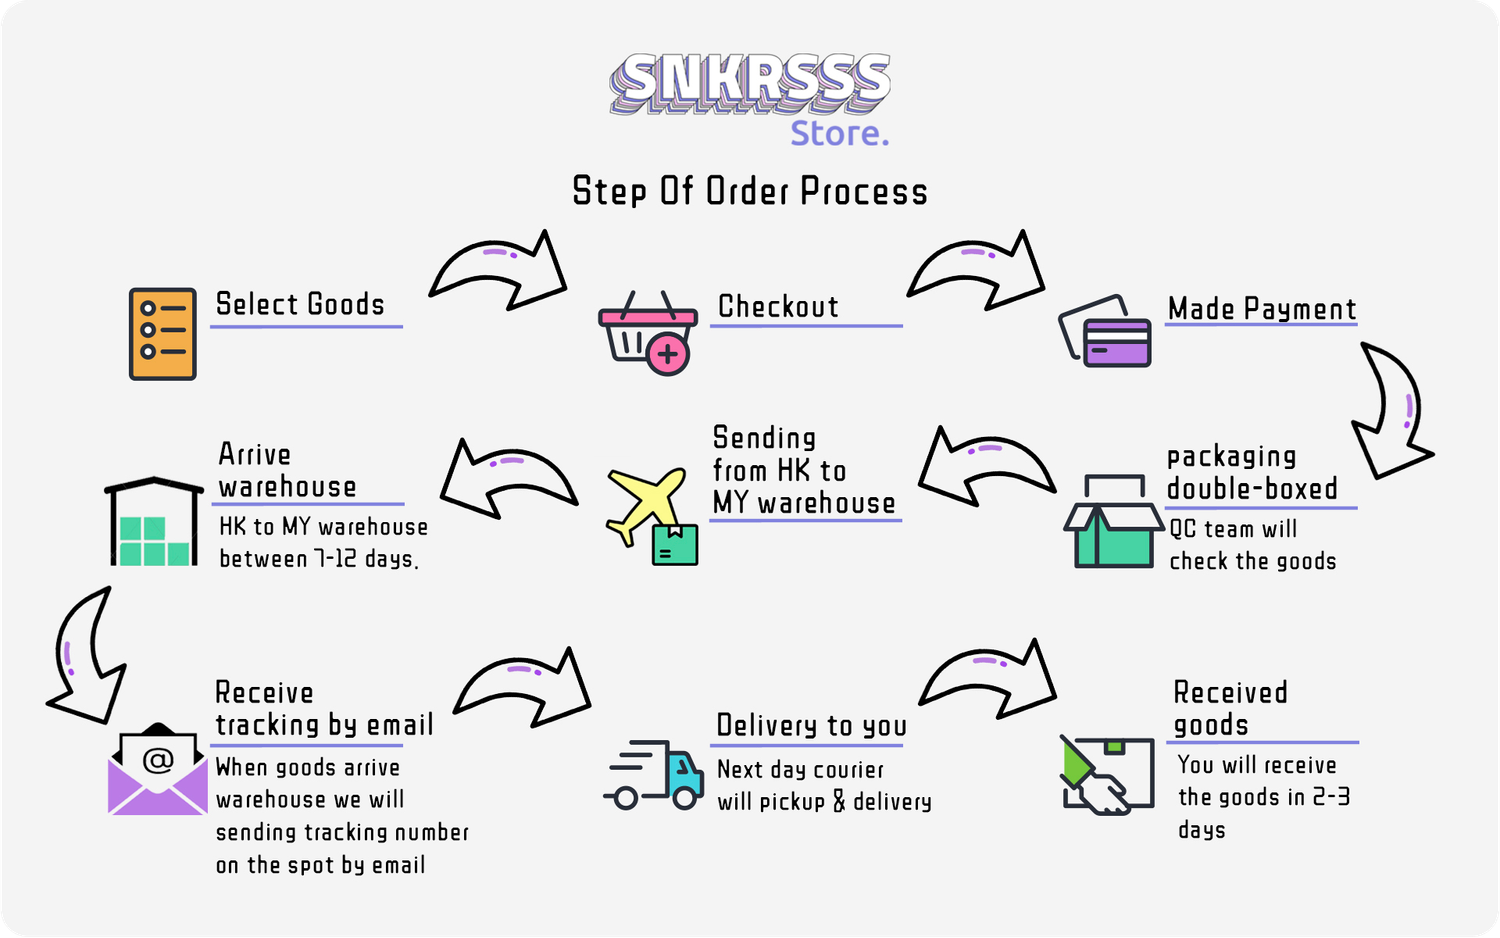 SNKRSSS Store - How Your Order Process